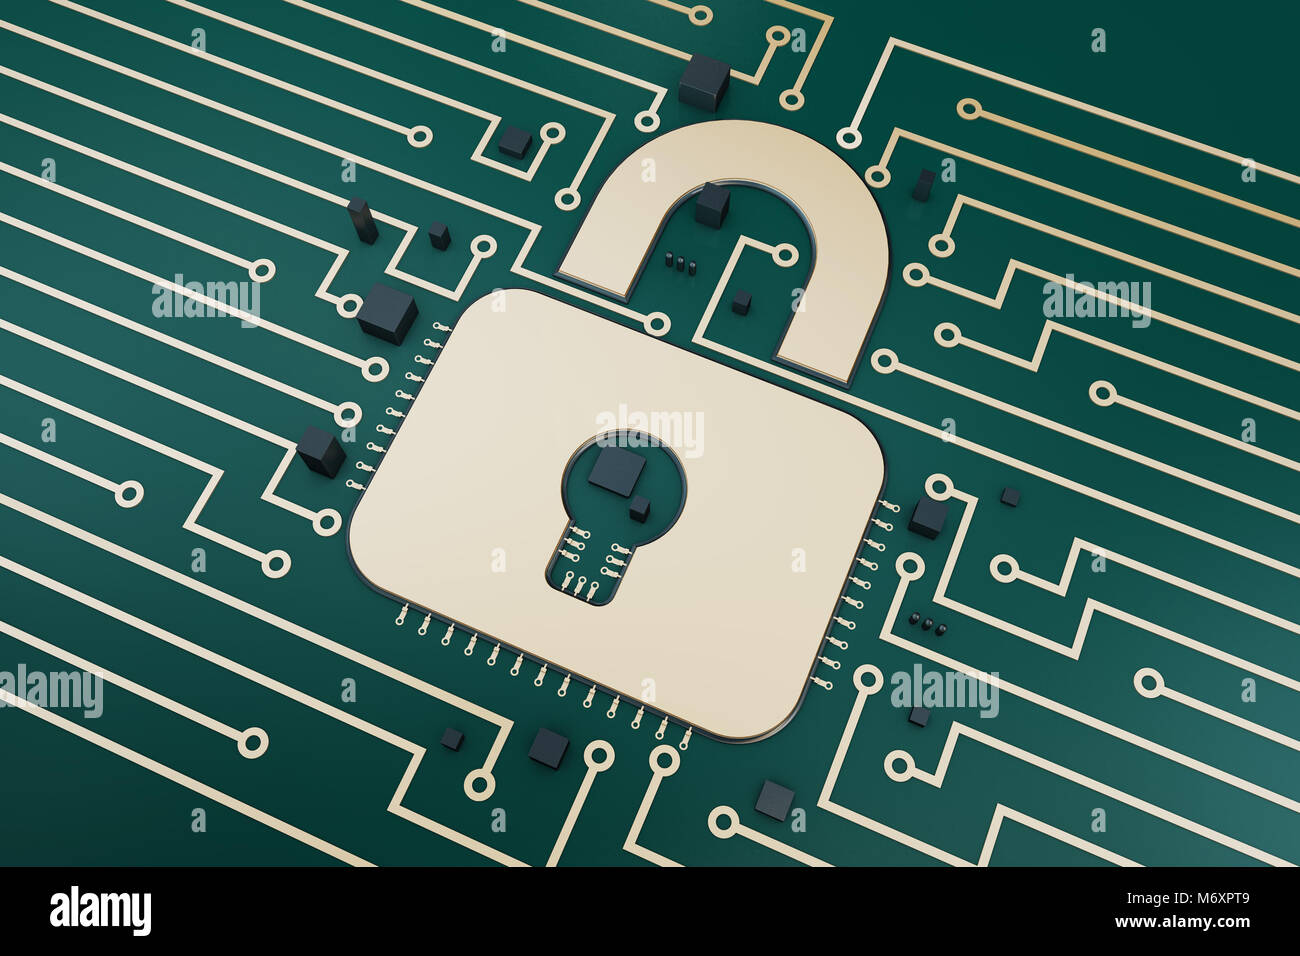 Locks and Circuit Boards, Technology Finance Stock Photo